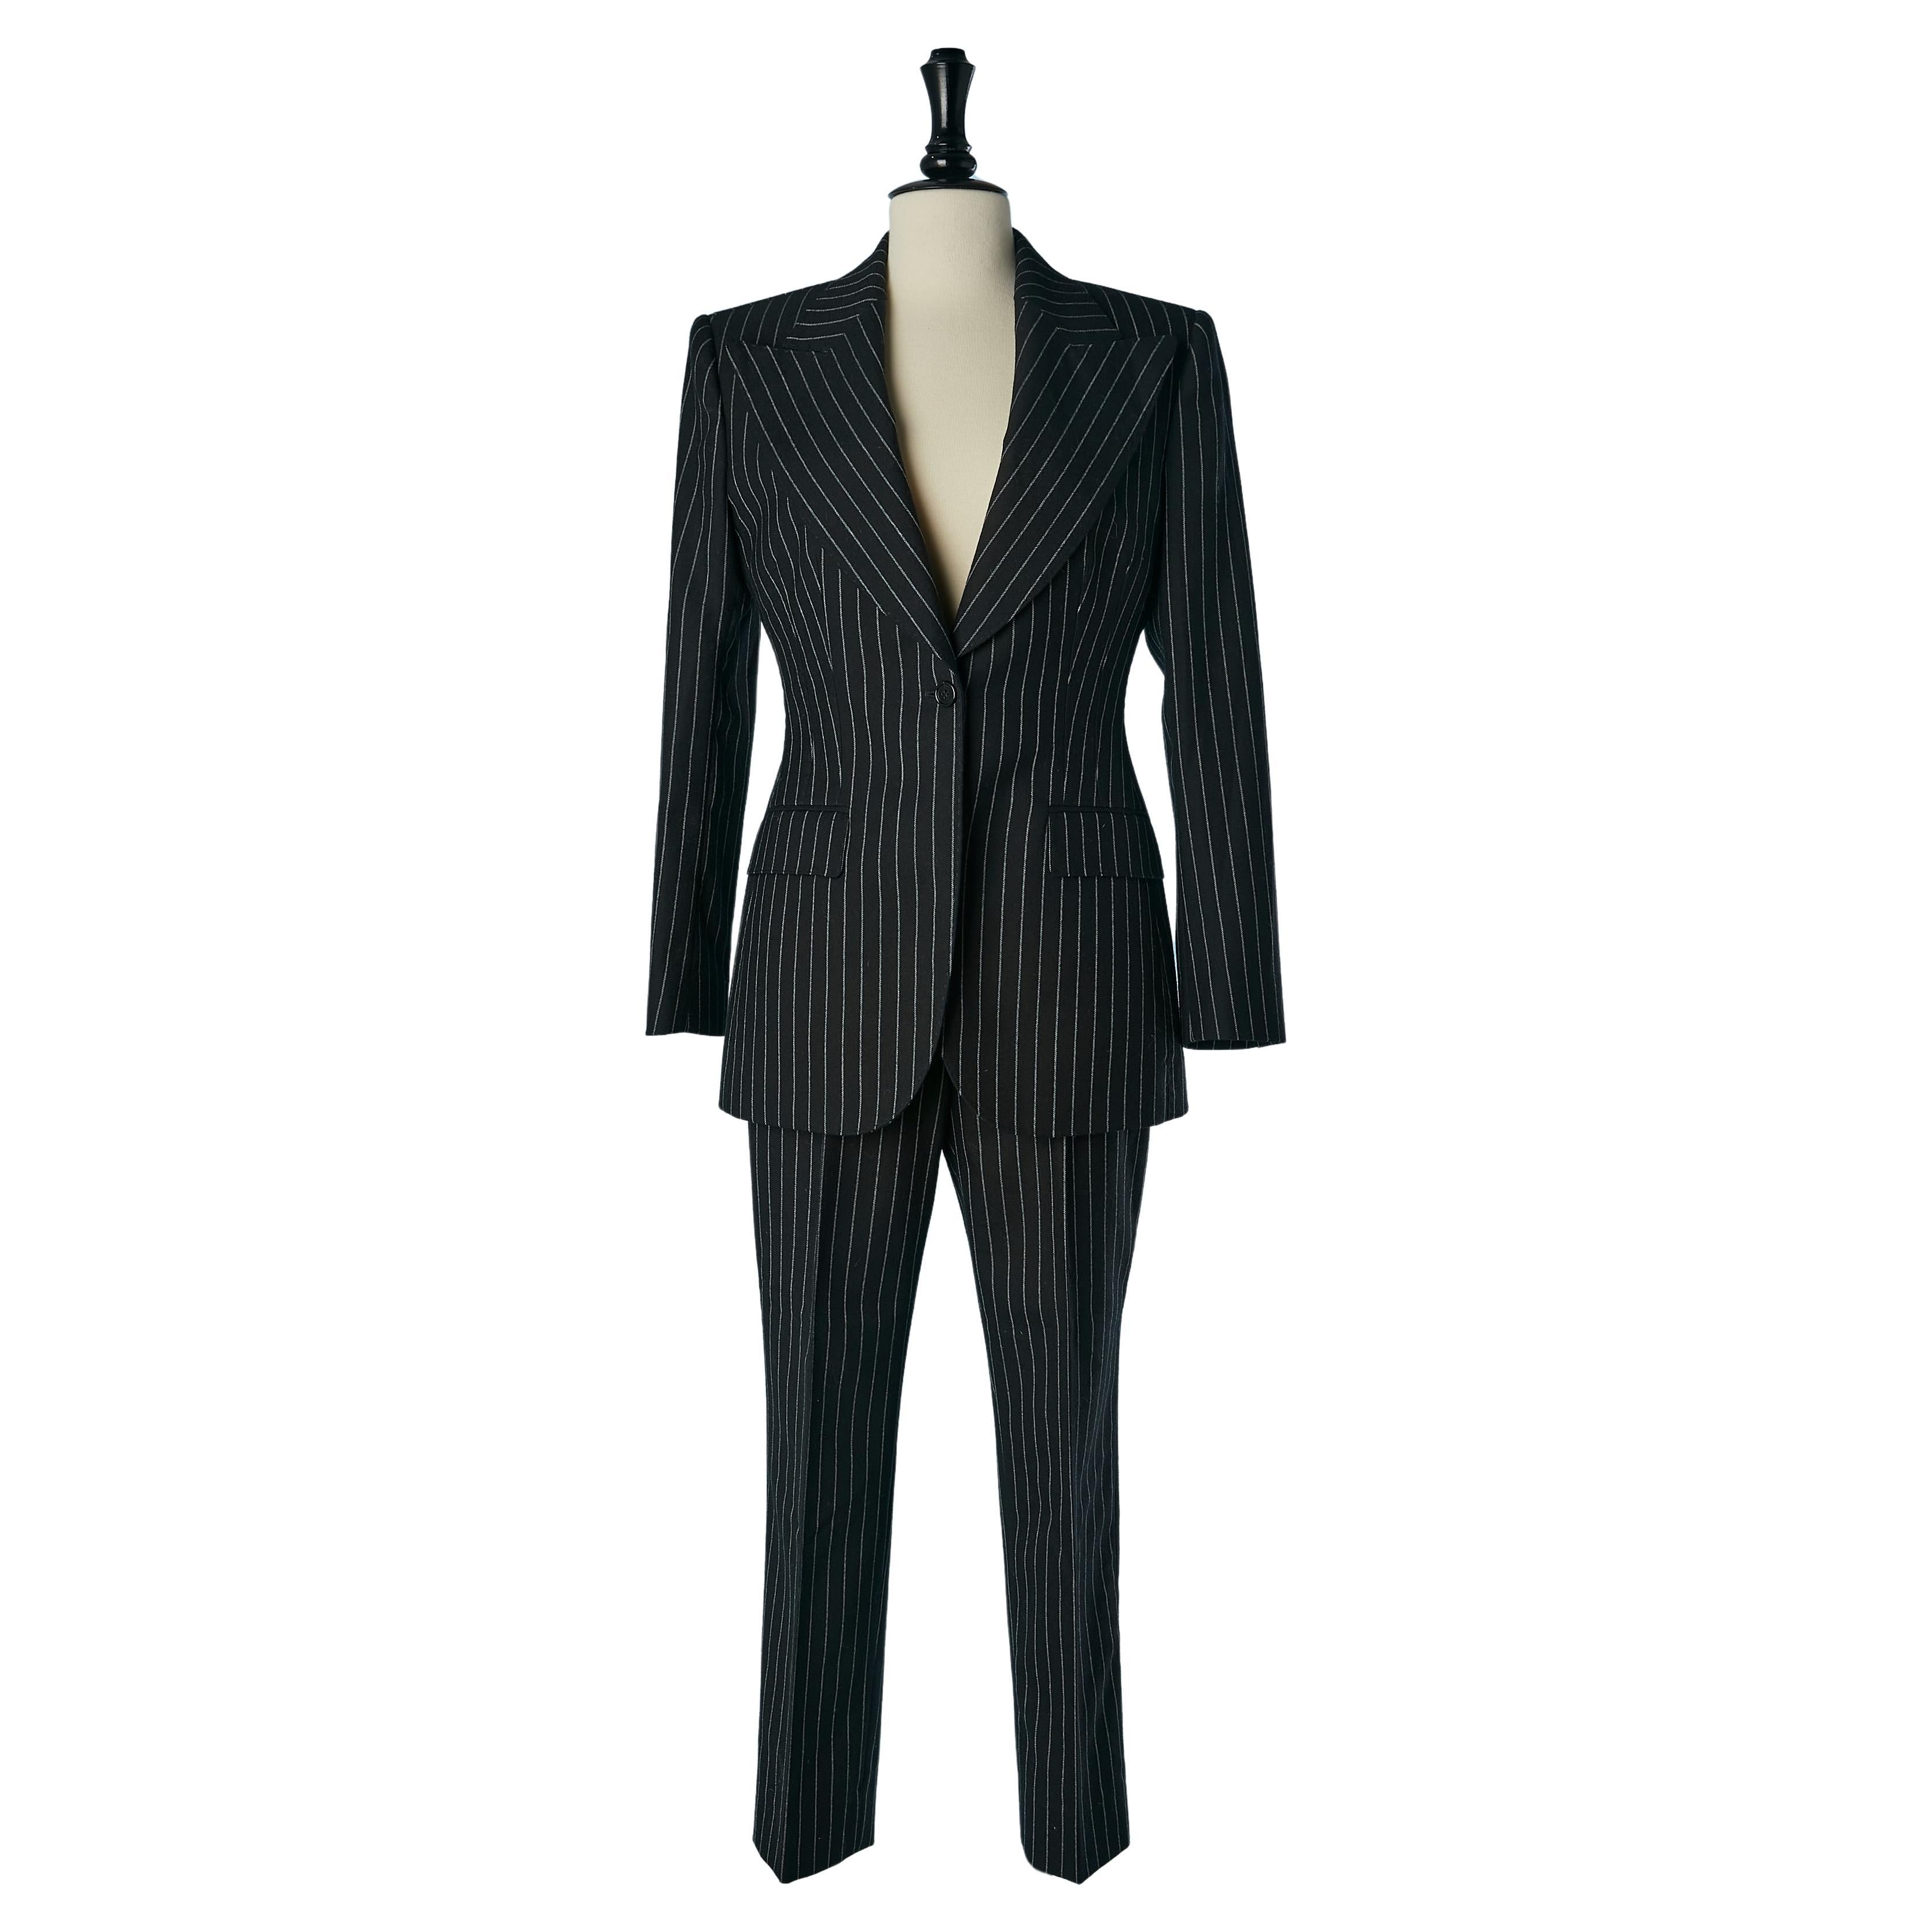 Black and white pin-striped trousers-suit Dolce & Gabbana 